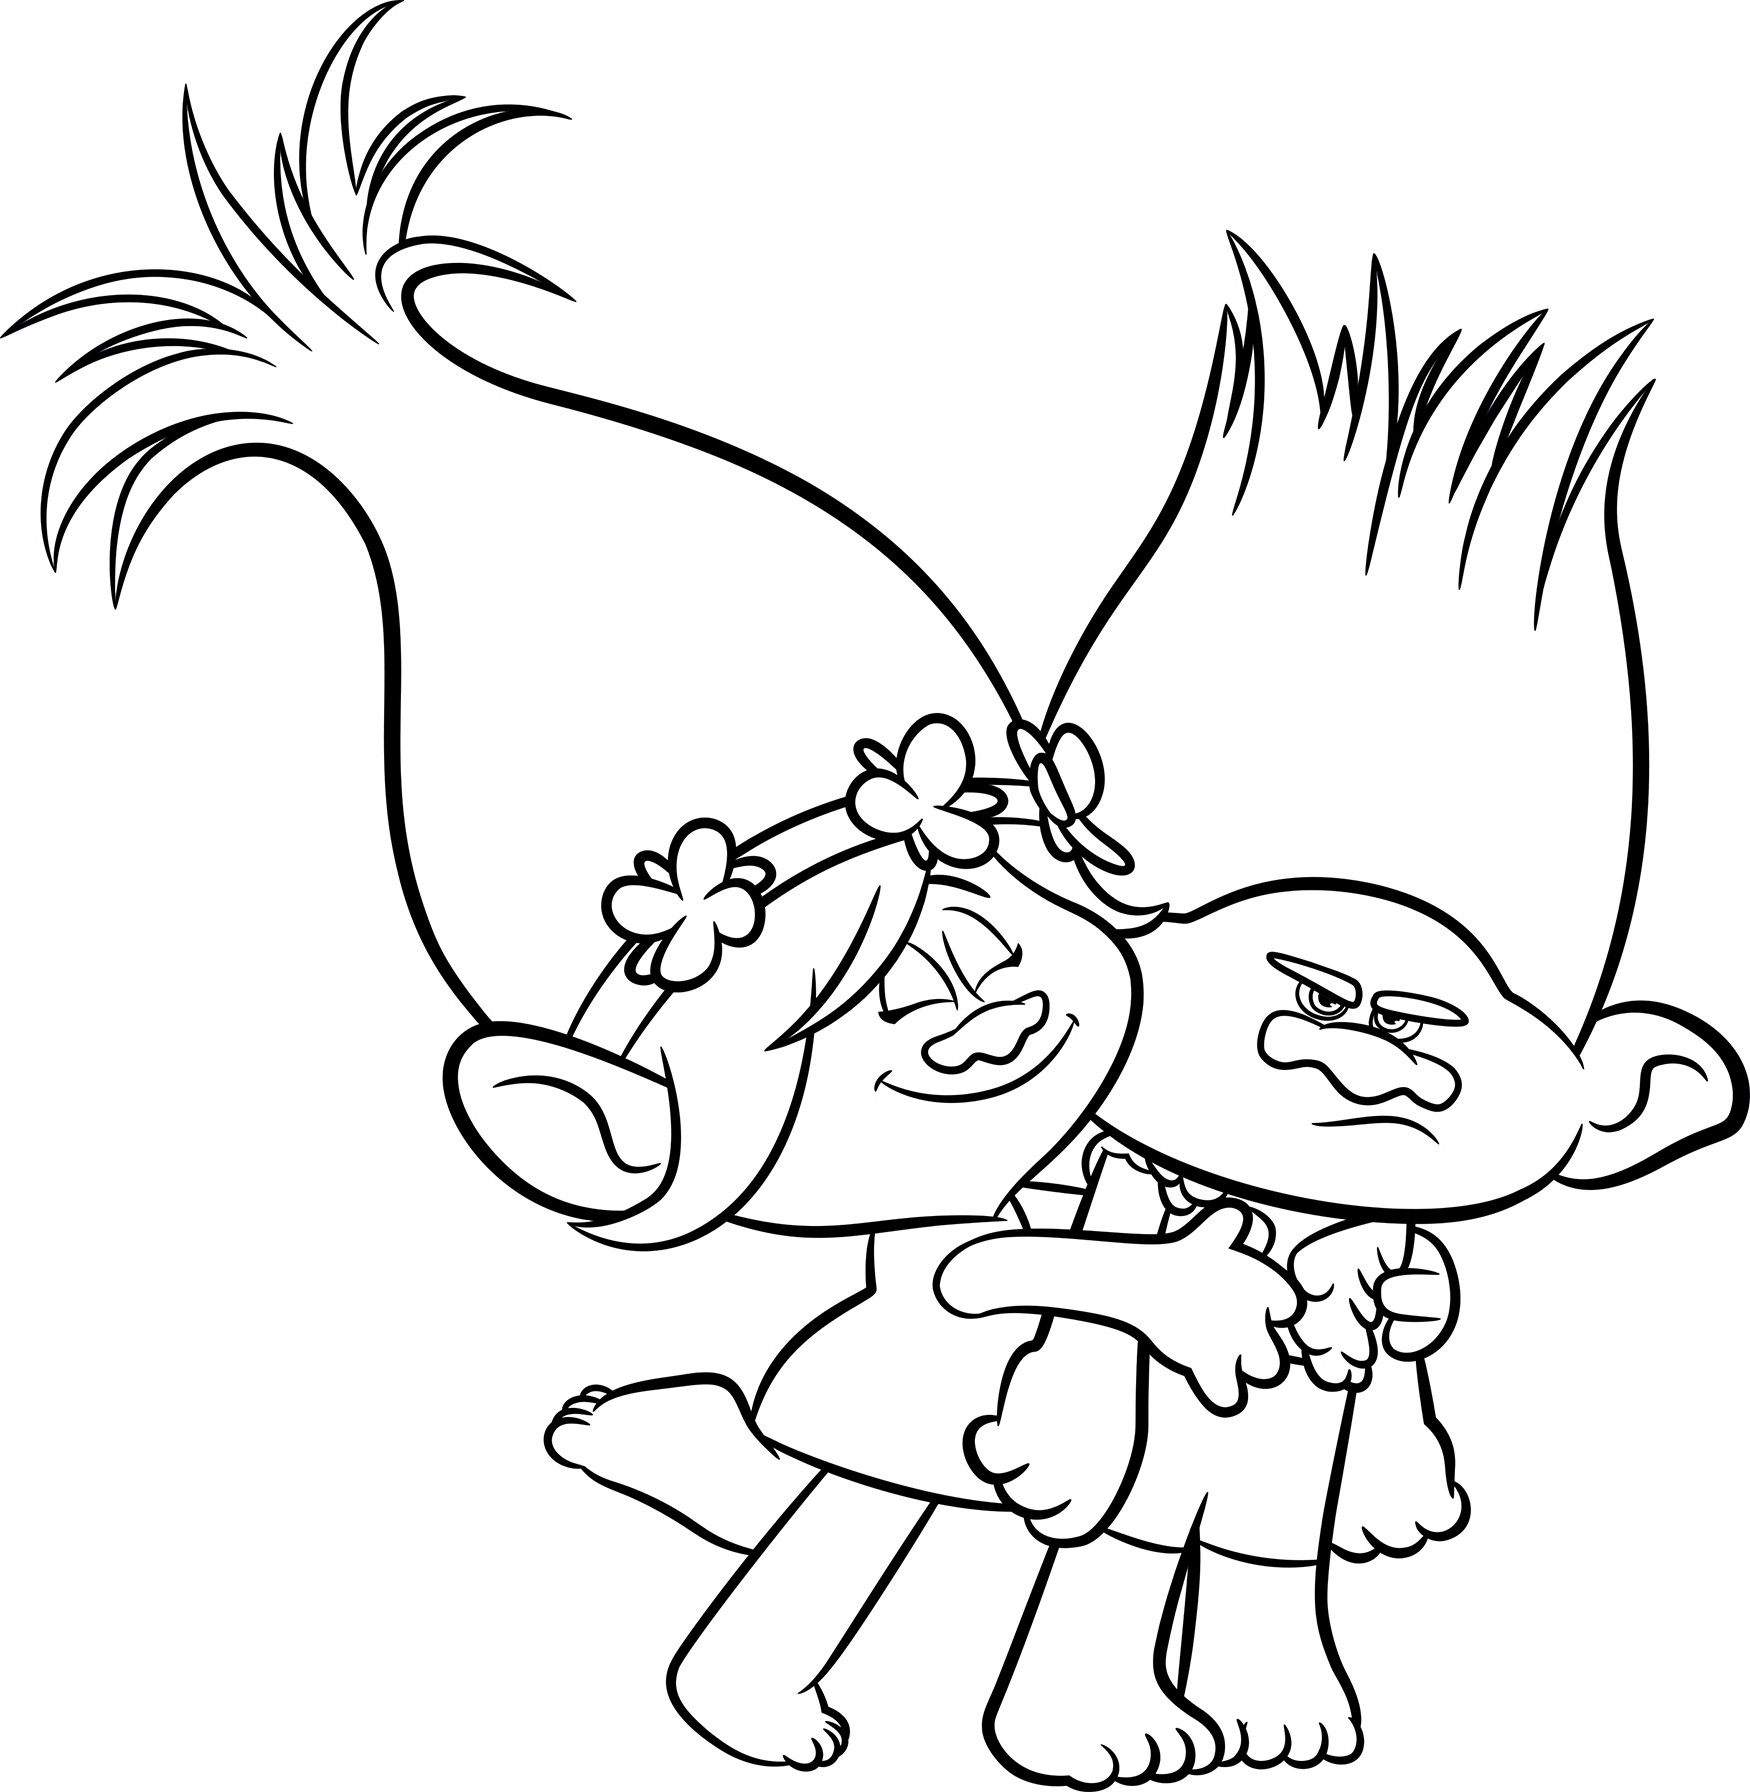 Princess Poppy and Branch Coloring Page Wallpaper